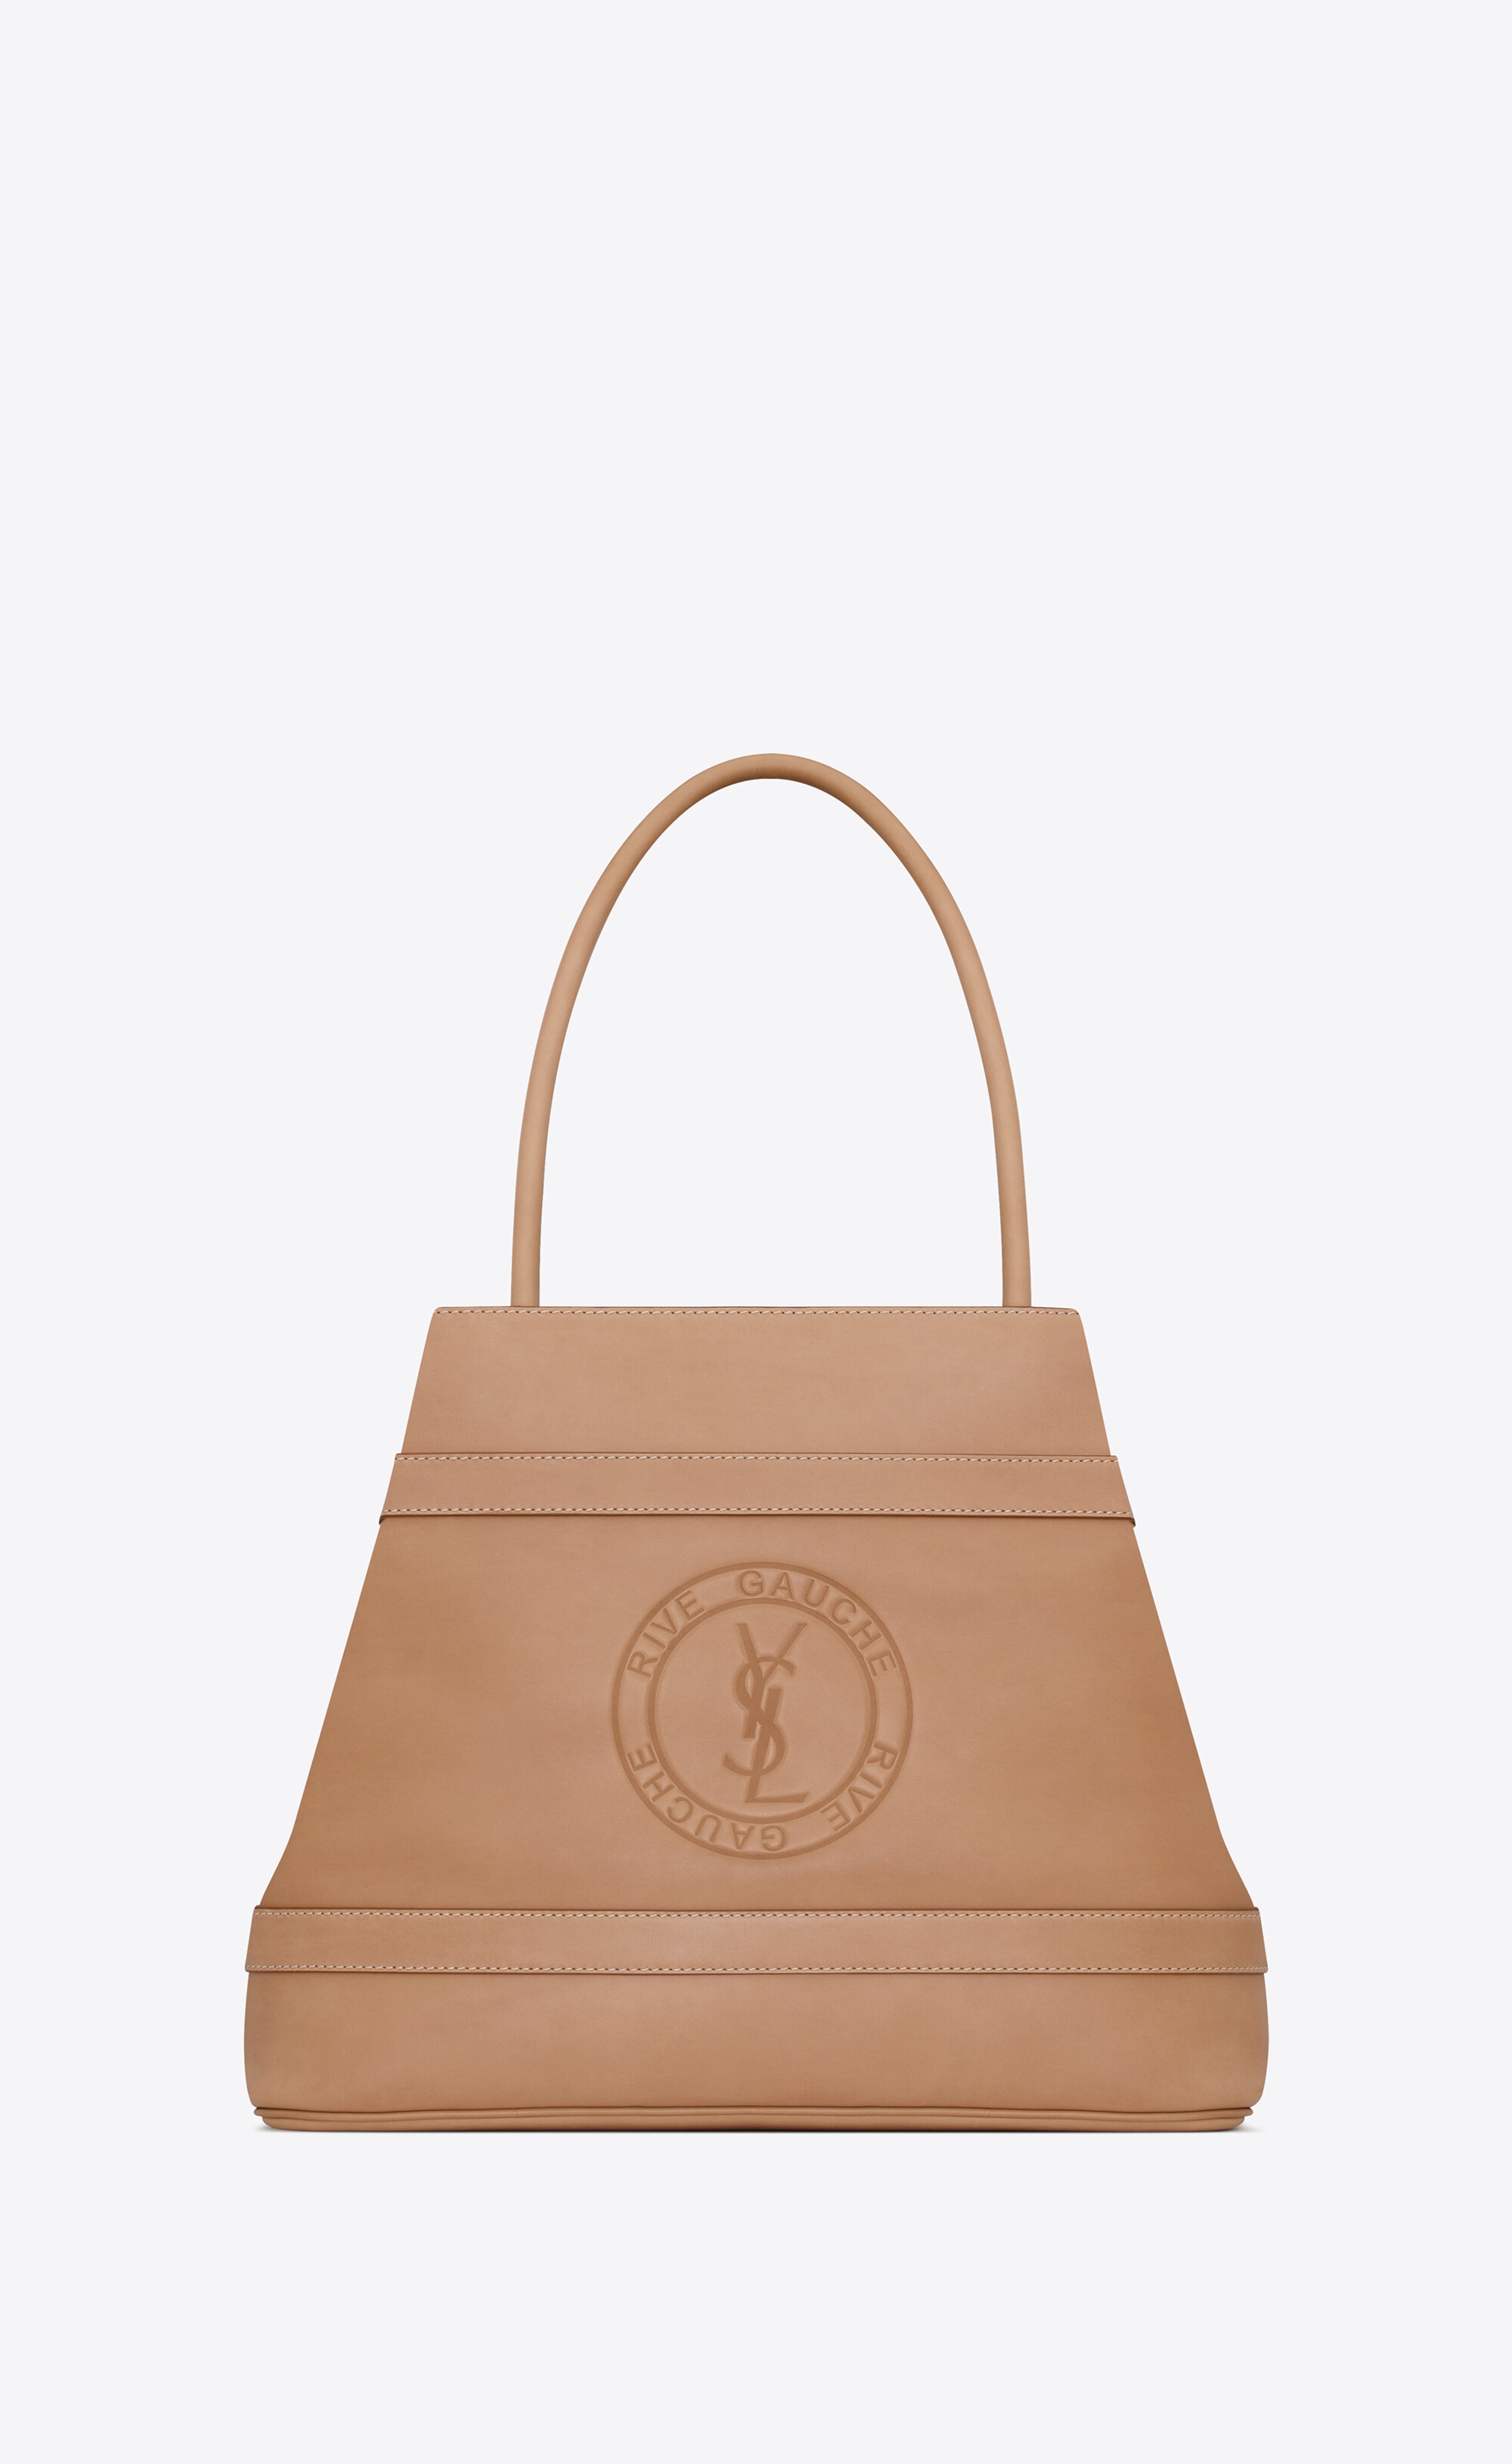 rive gauche tote bag in vegetable-tanned leather - 2